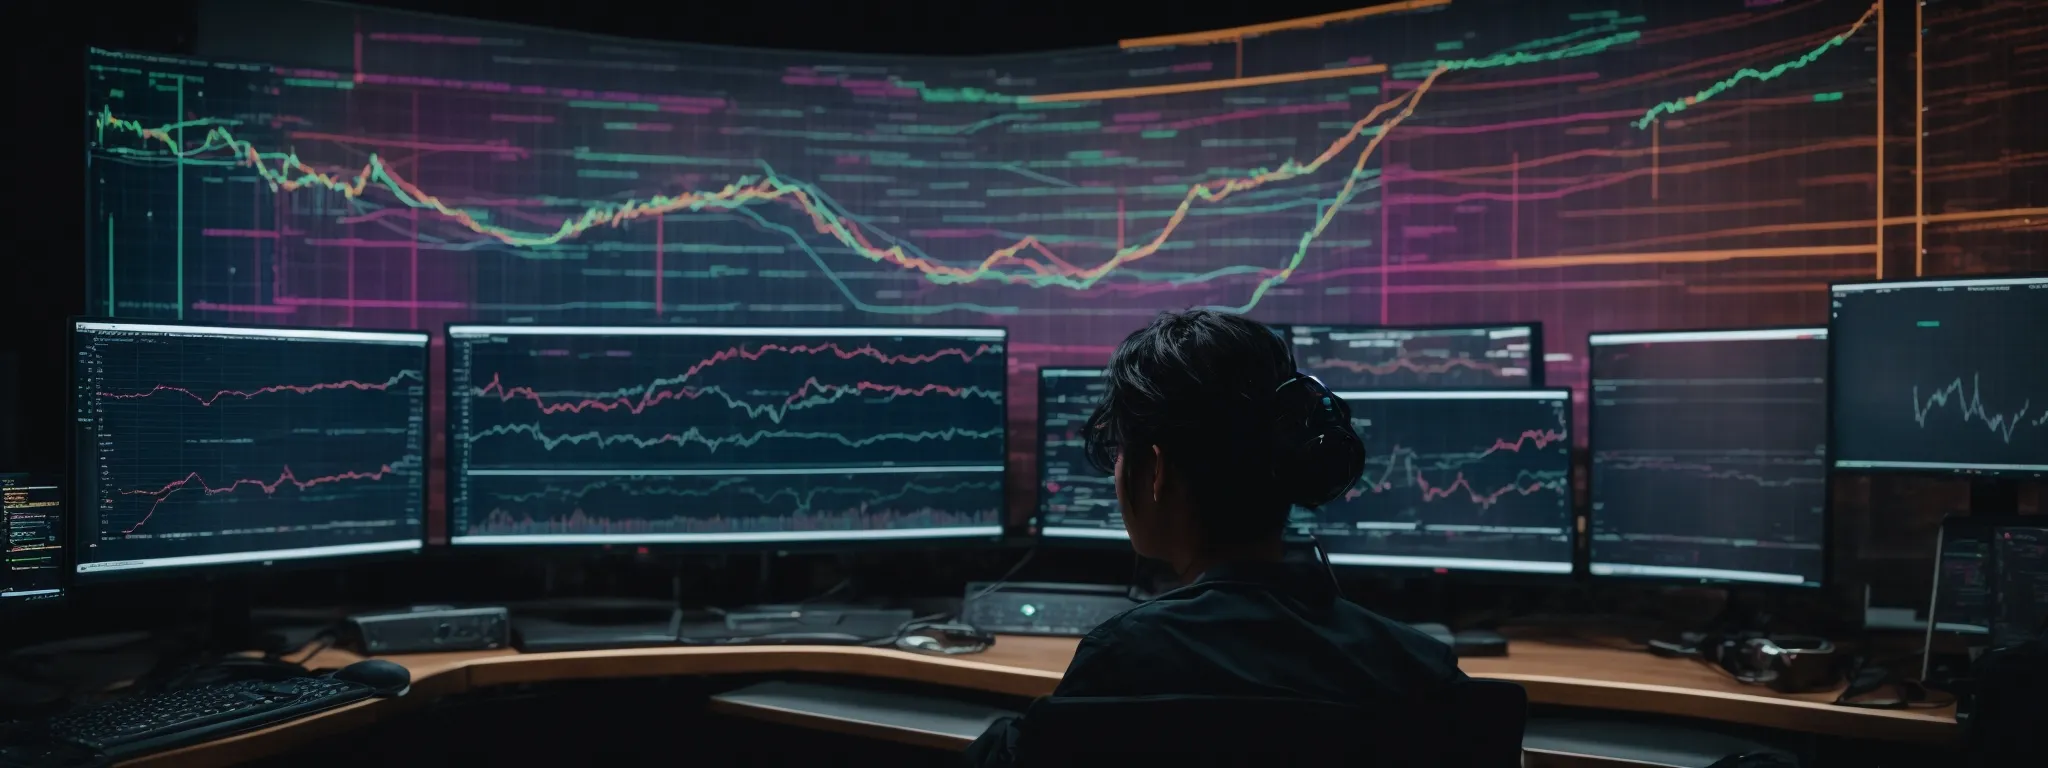 a person sits in front of a large monitor displaying colorful graphs and intricate web structures, analyzing seo data within the majestic platform.